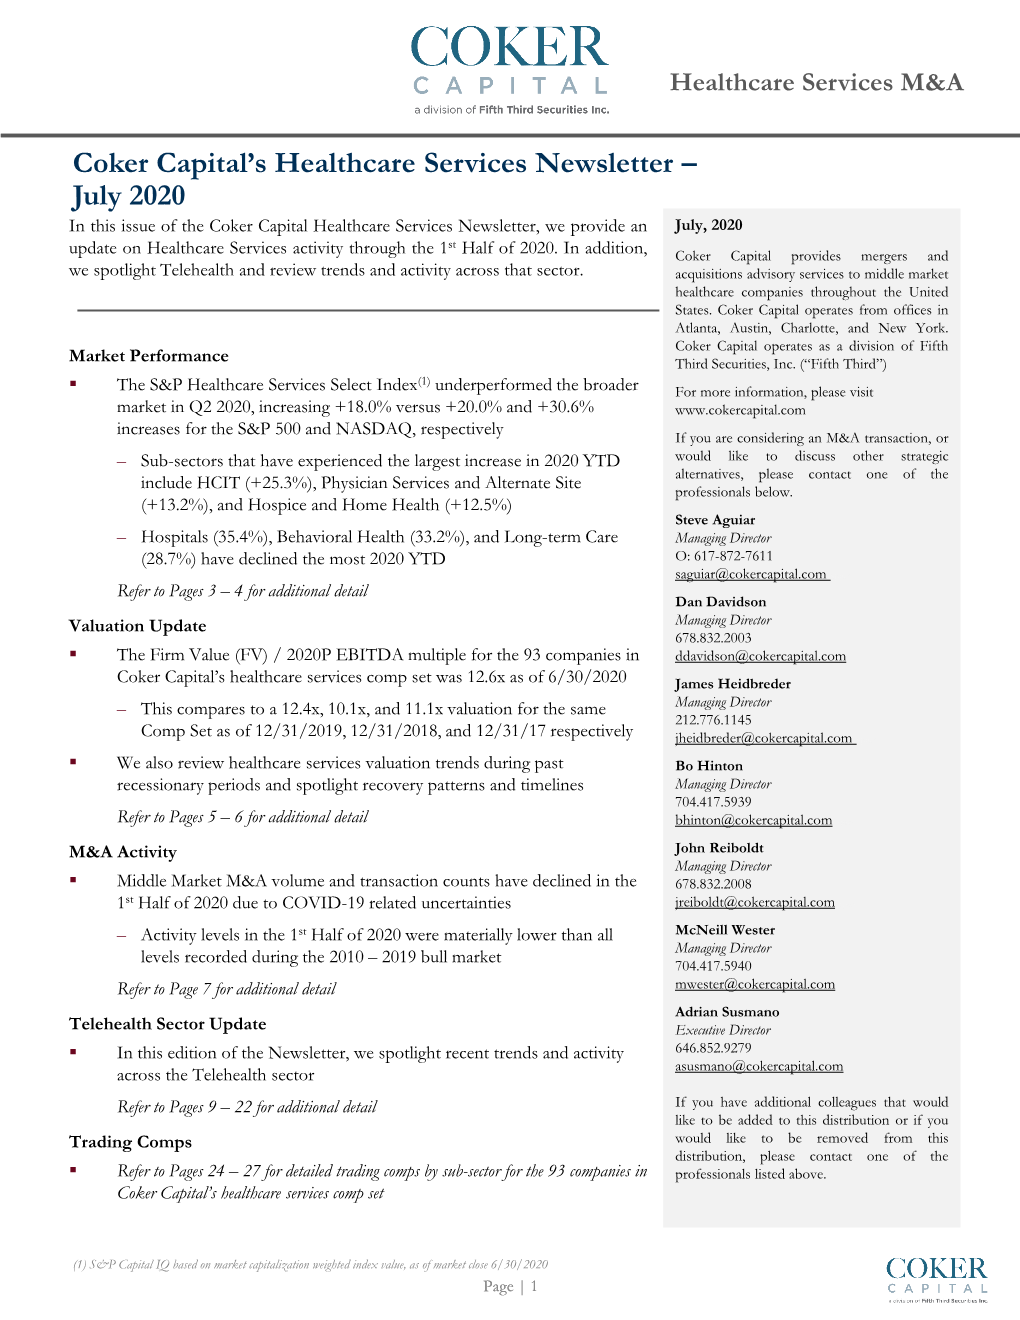 Coker Capital's Healthcare Services Newsletter – July 2020